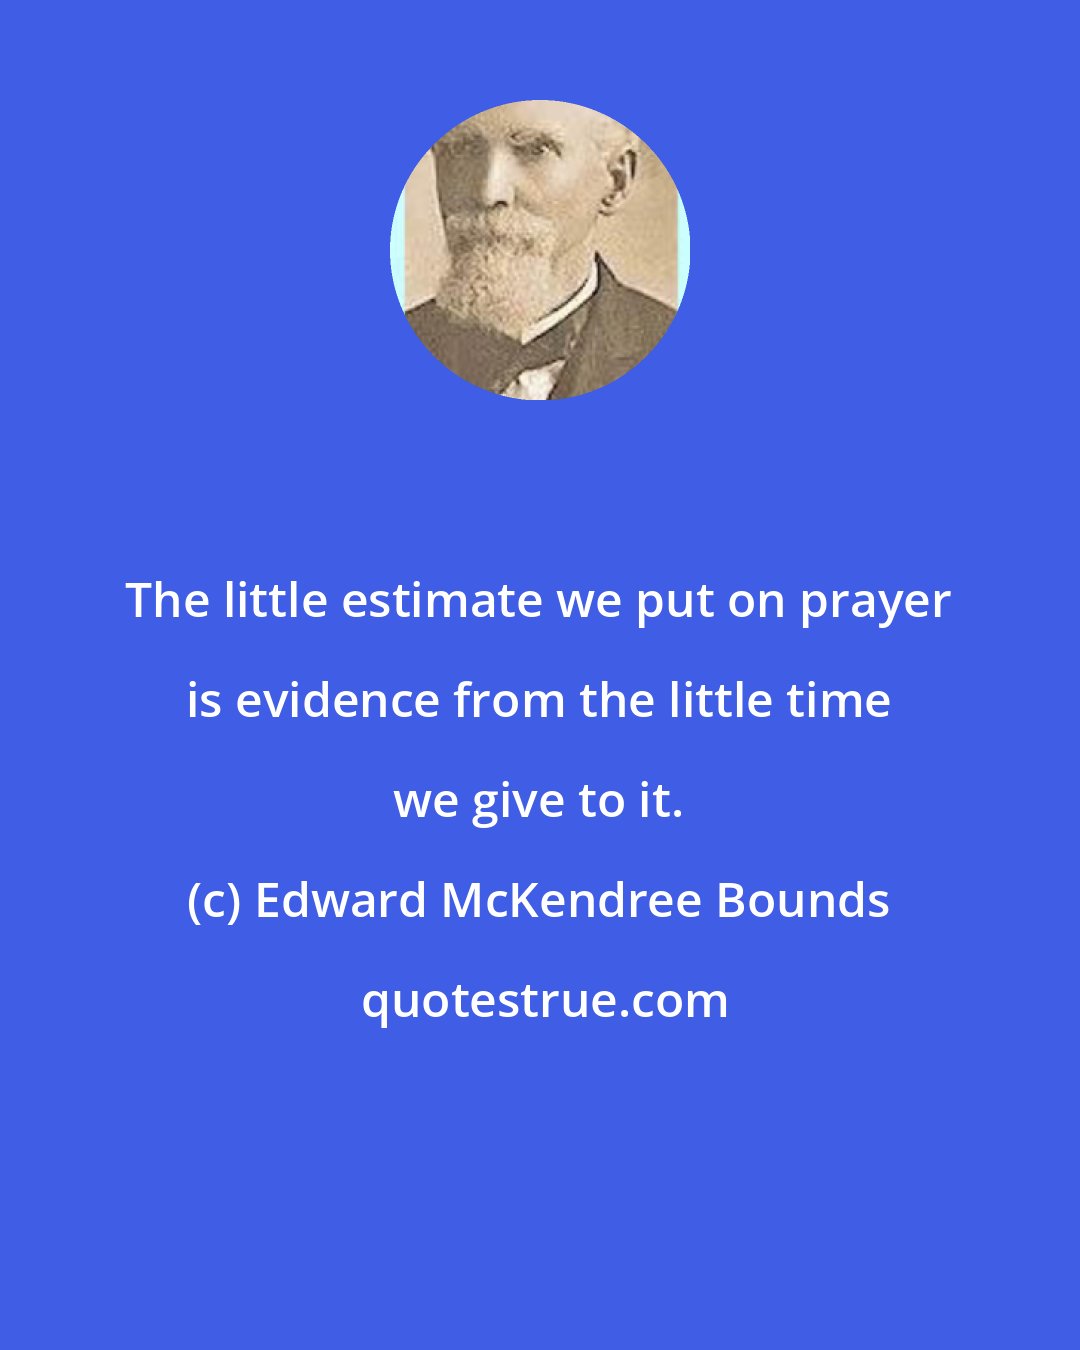 Edward McKendree Bounds: The little estimate we put on prayer is evidence from the little time we give to it.